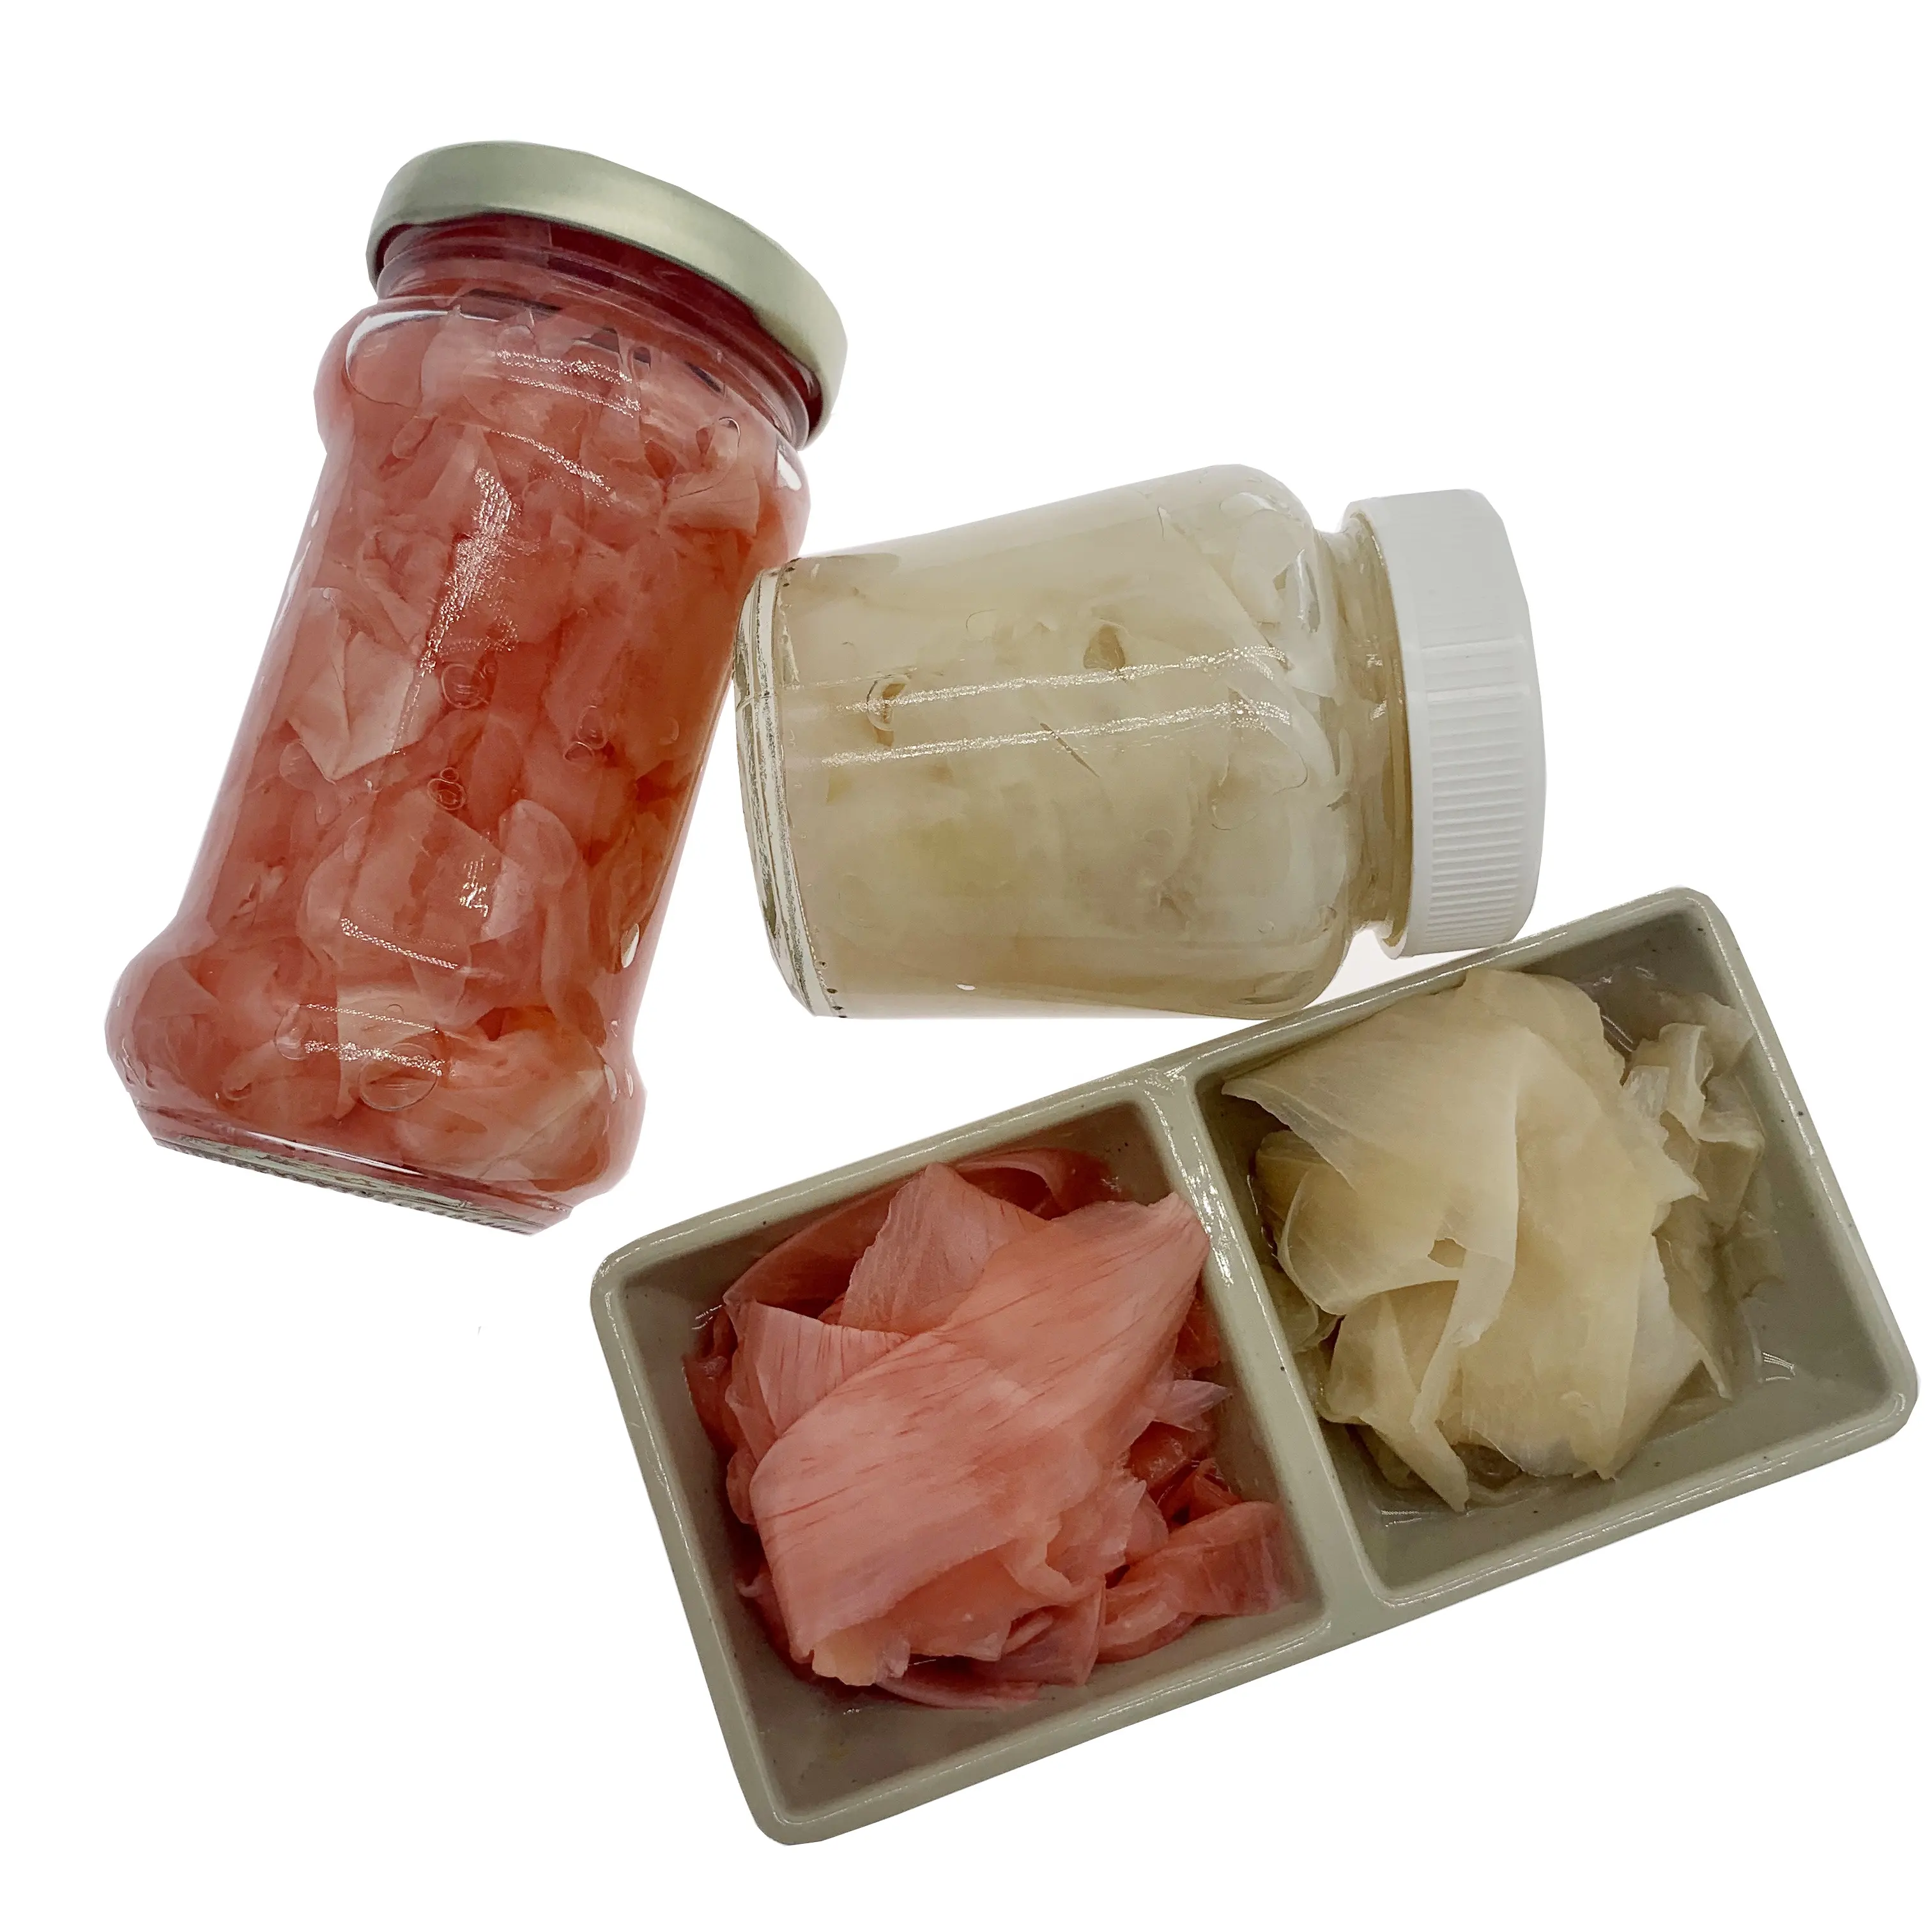 wholesale Chinese pickled vegetables commonly used in Japanese cuisine kimchi productionwithe and pink pickled sushi ginger